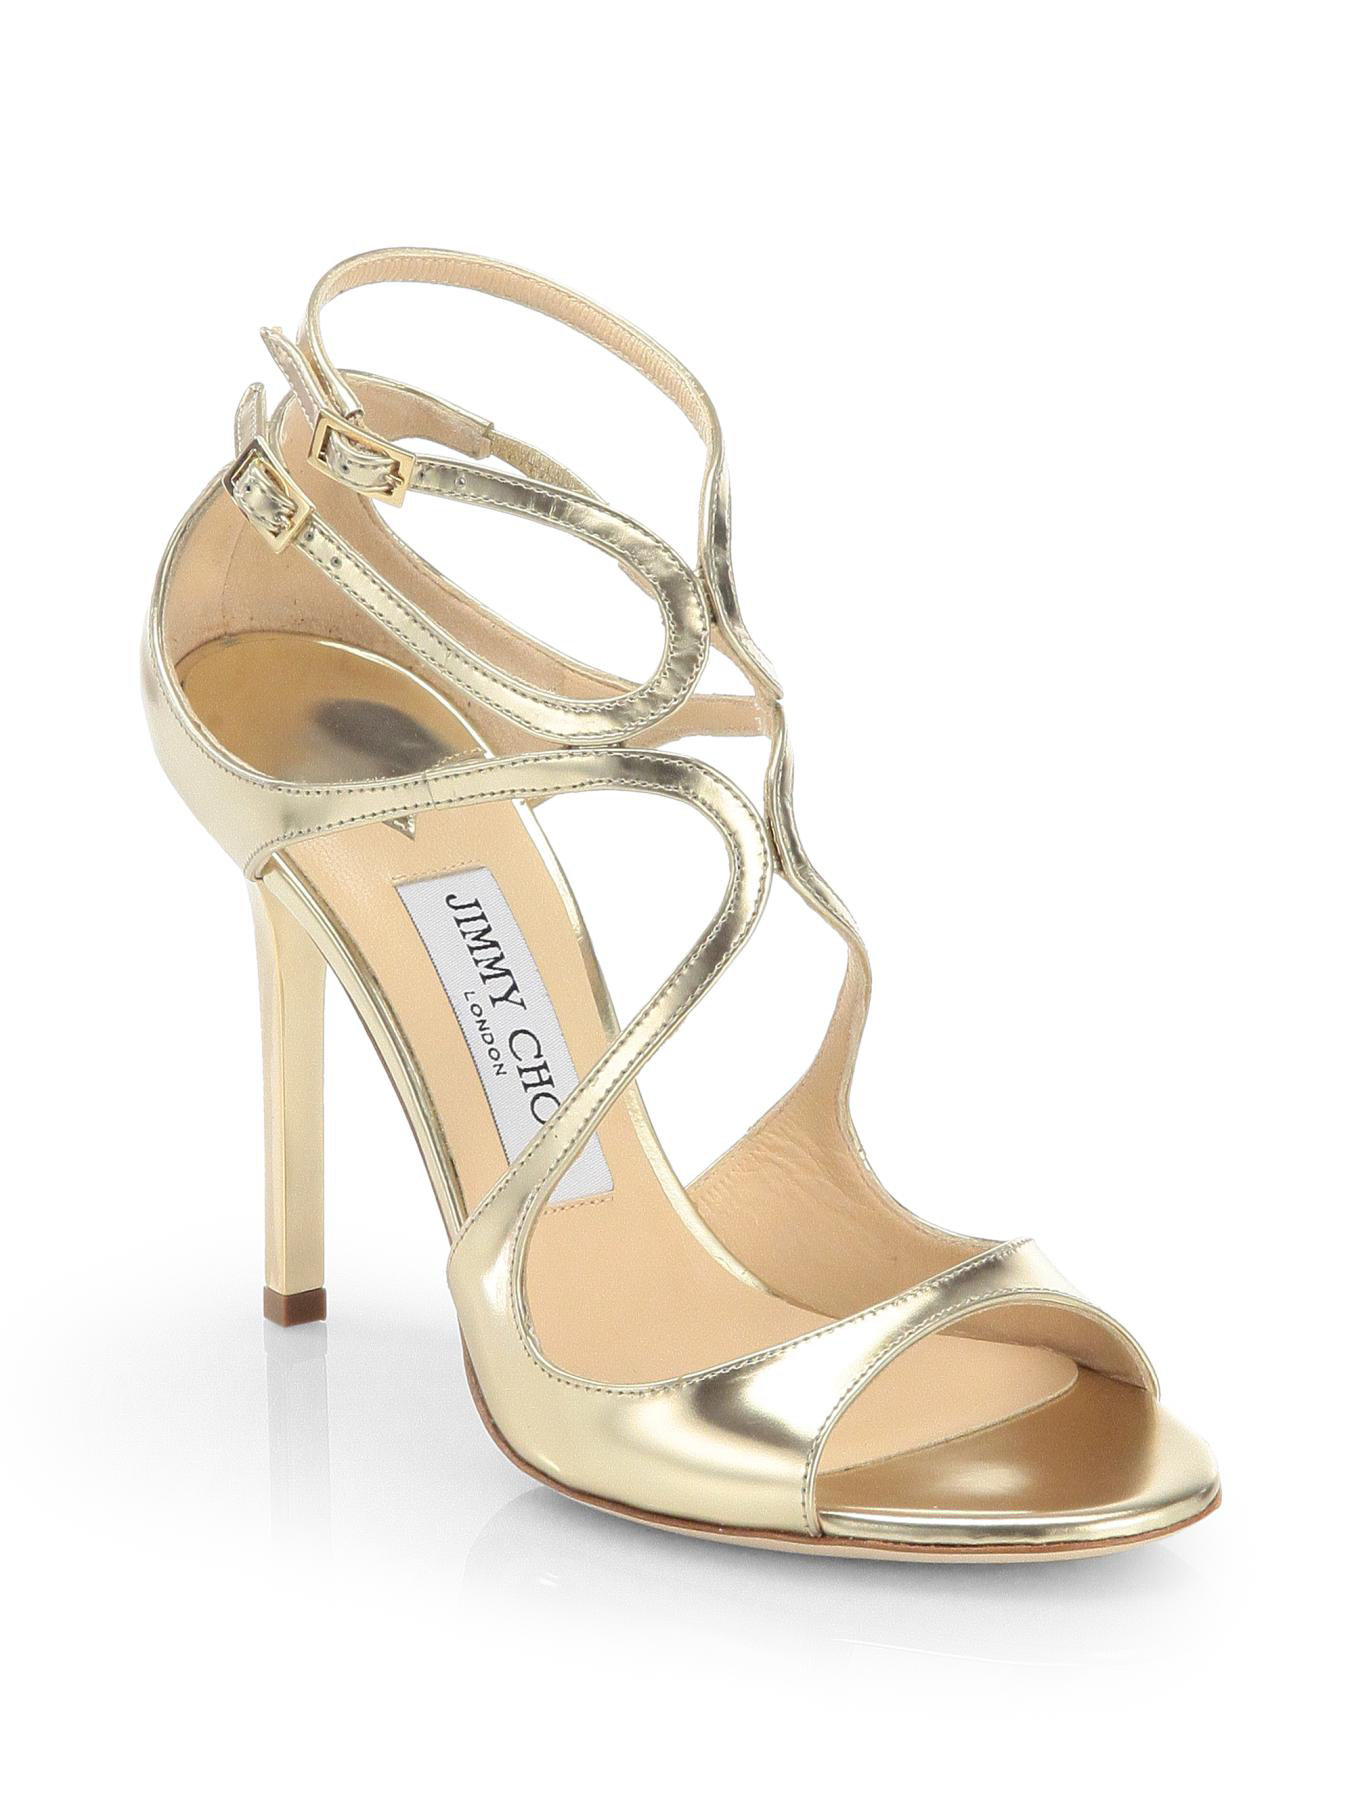 Jimmy choo Lang 100 Strappy Mirror Leather Sandals in Metallic | Lyst